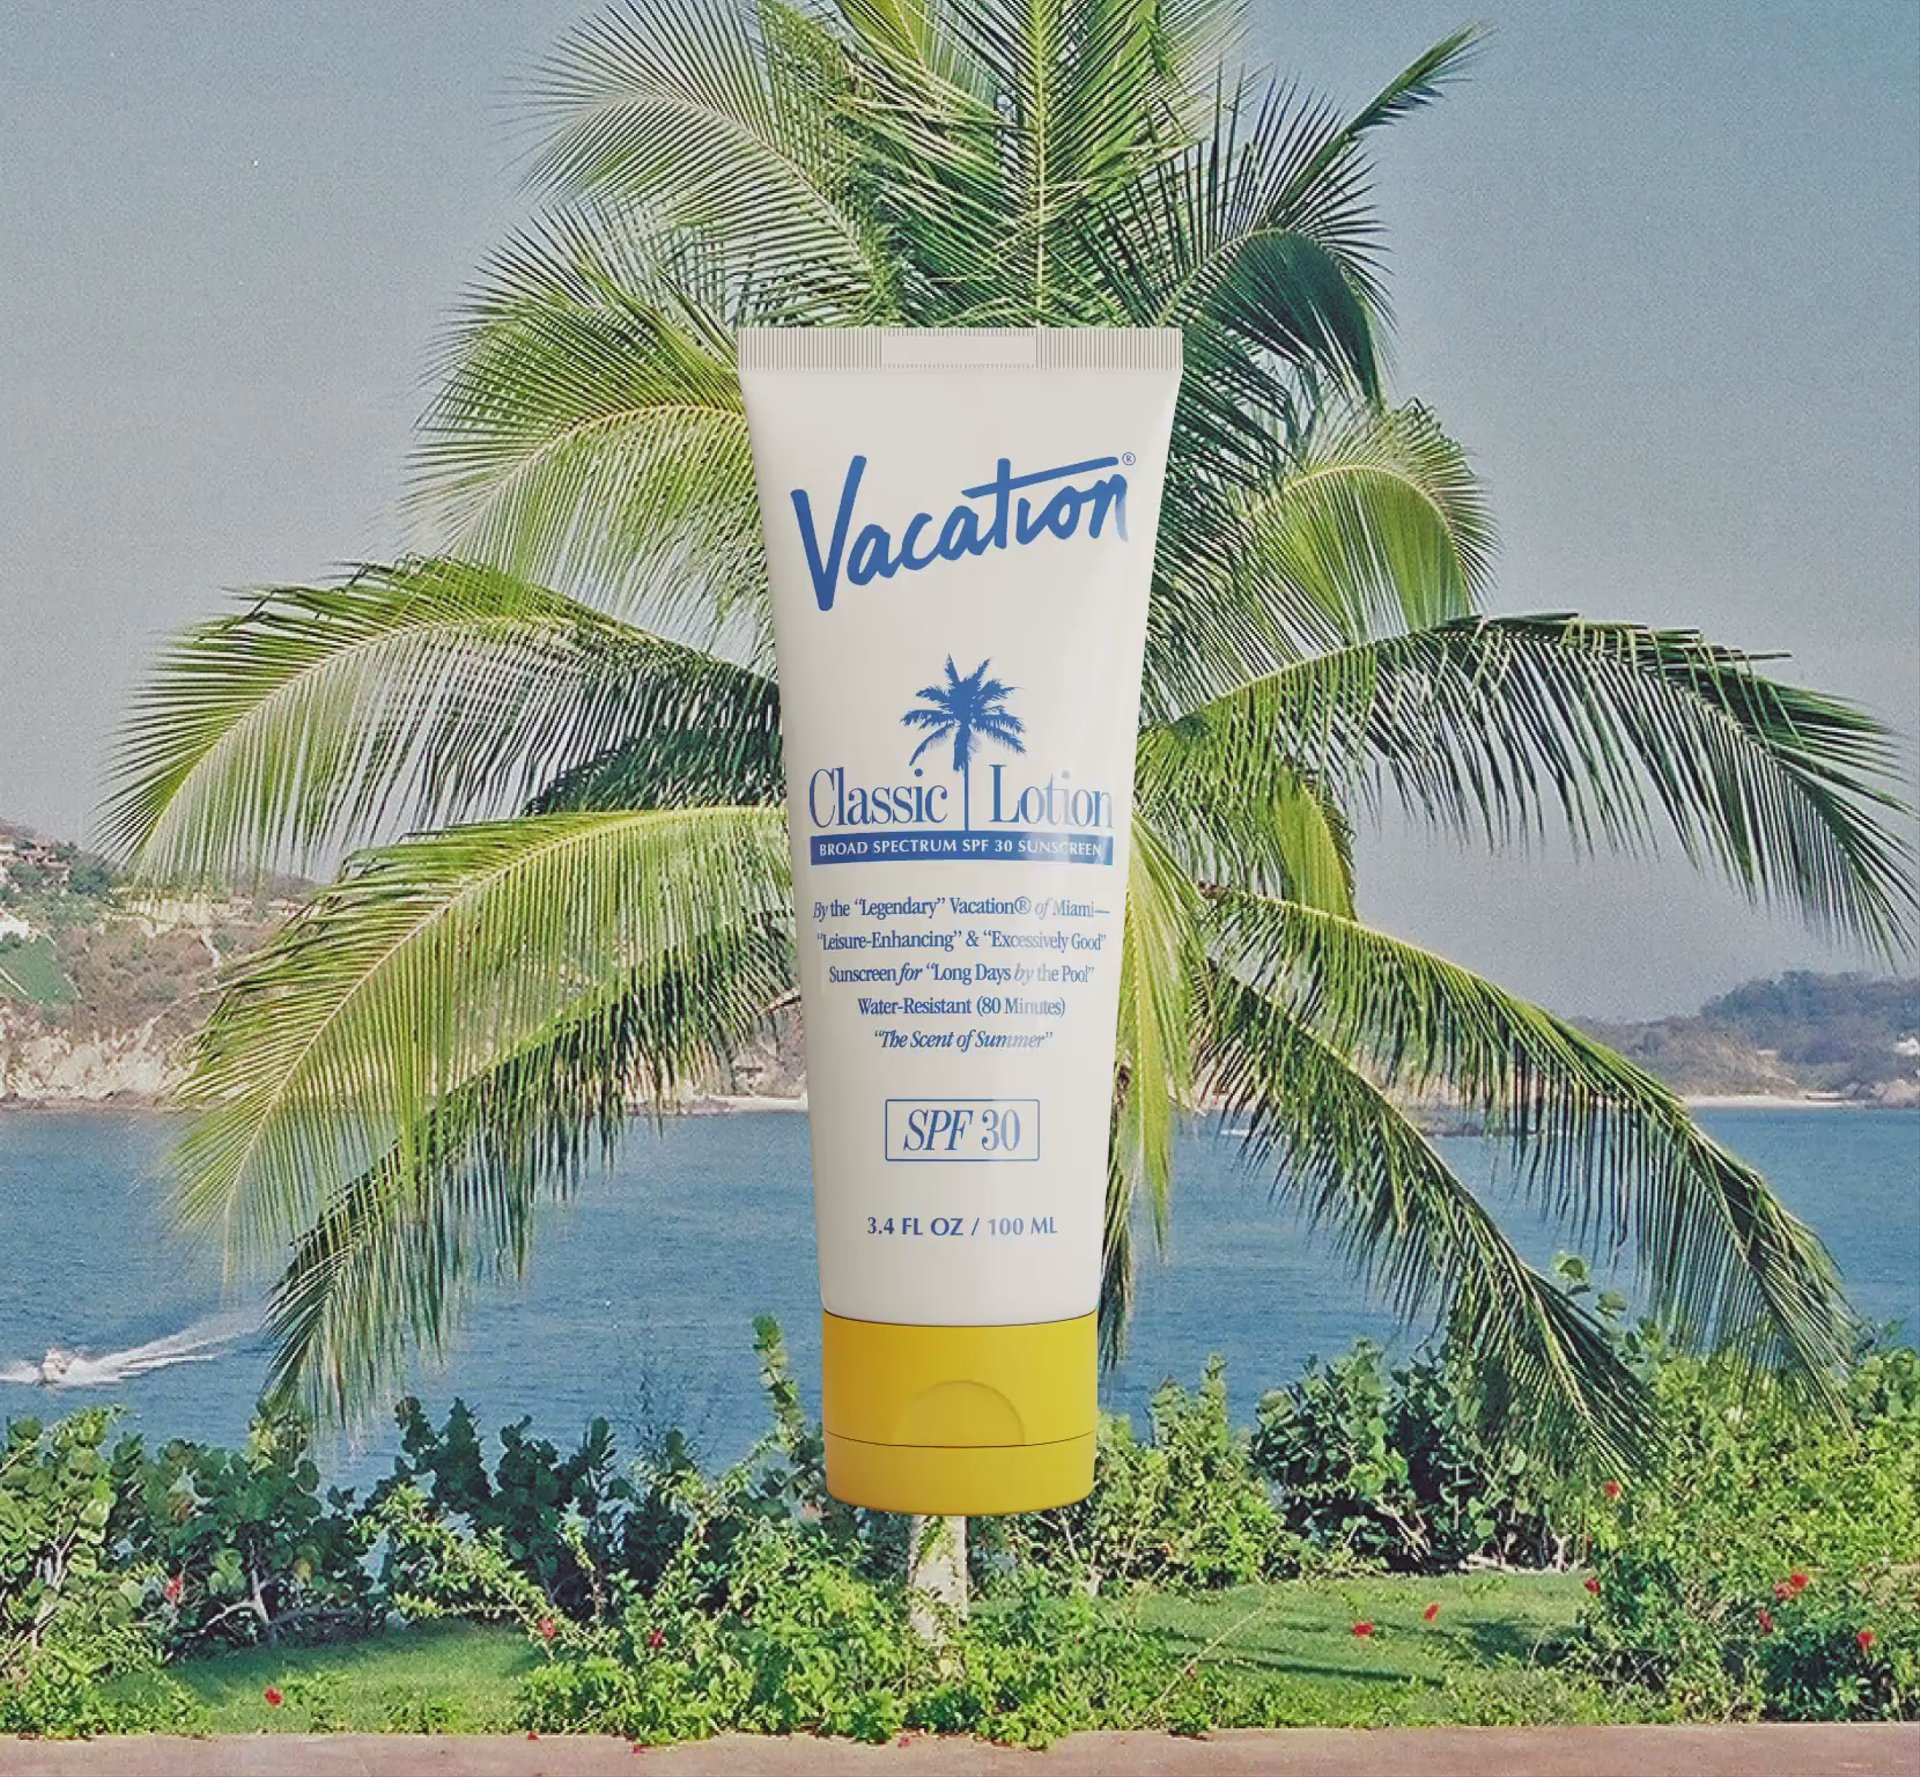 Classic The Worlds Sunscreen | Vacation®